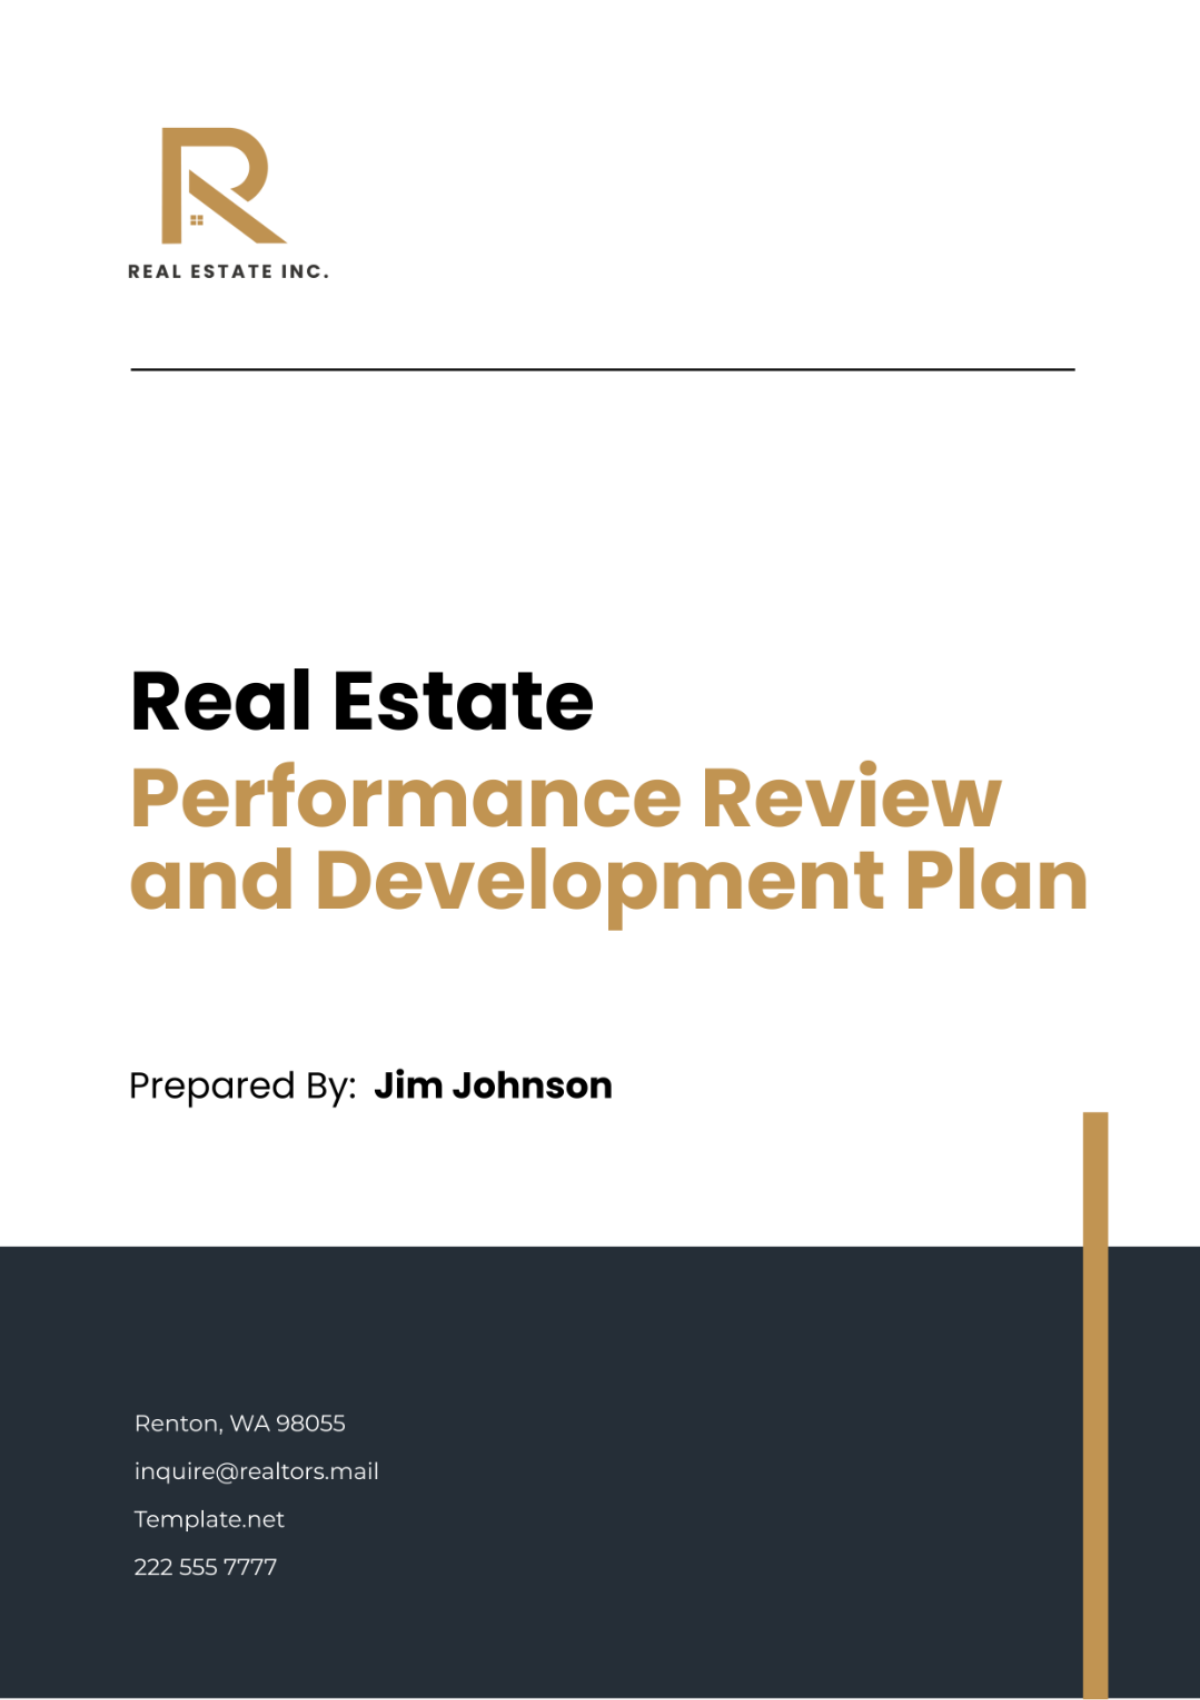 Free Real Estate Performance Review and Development Plan Template